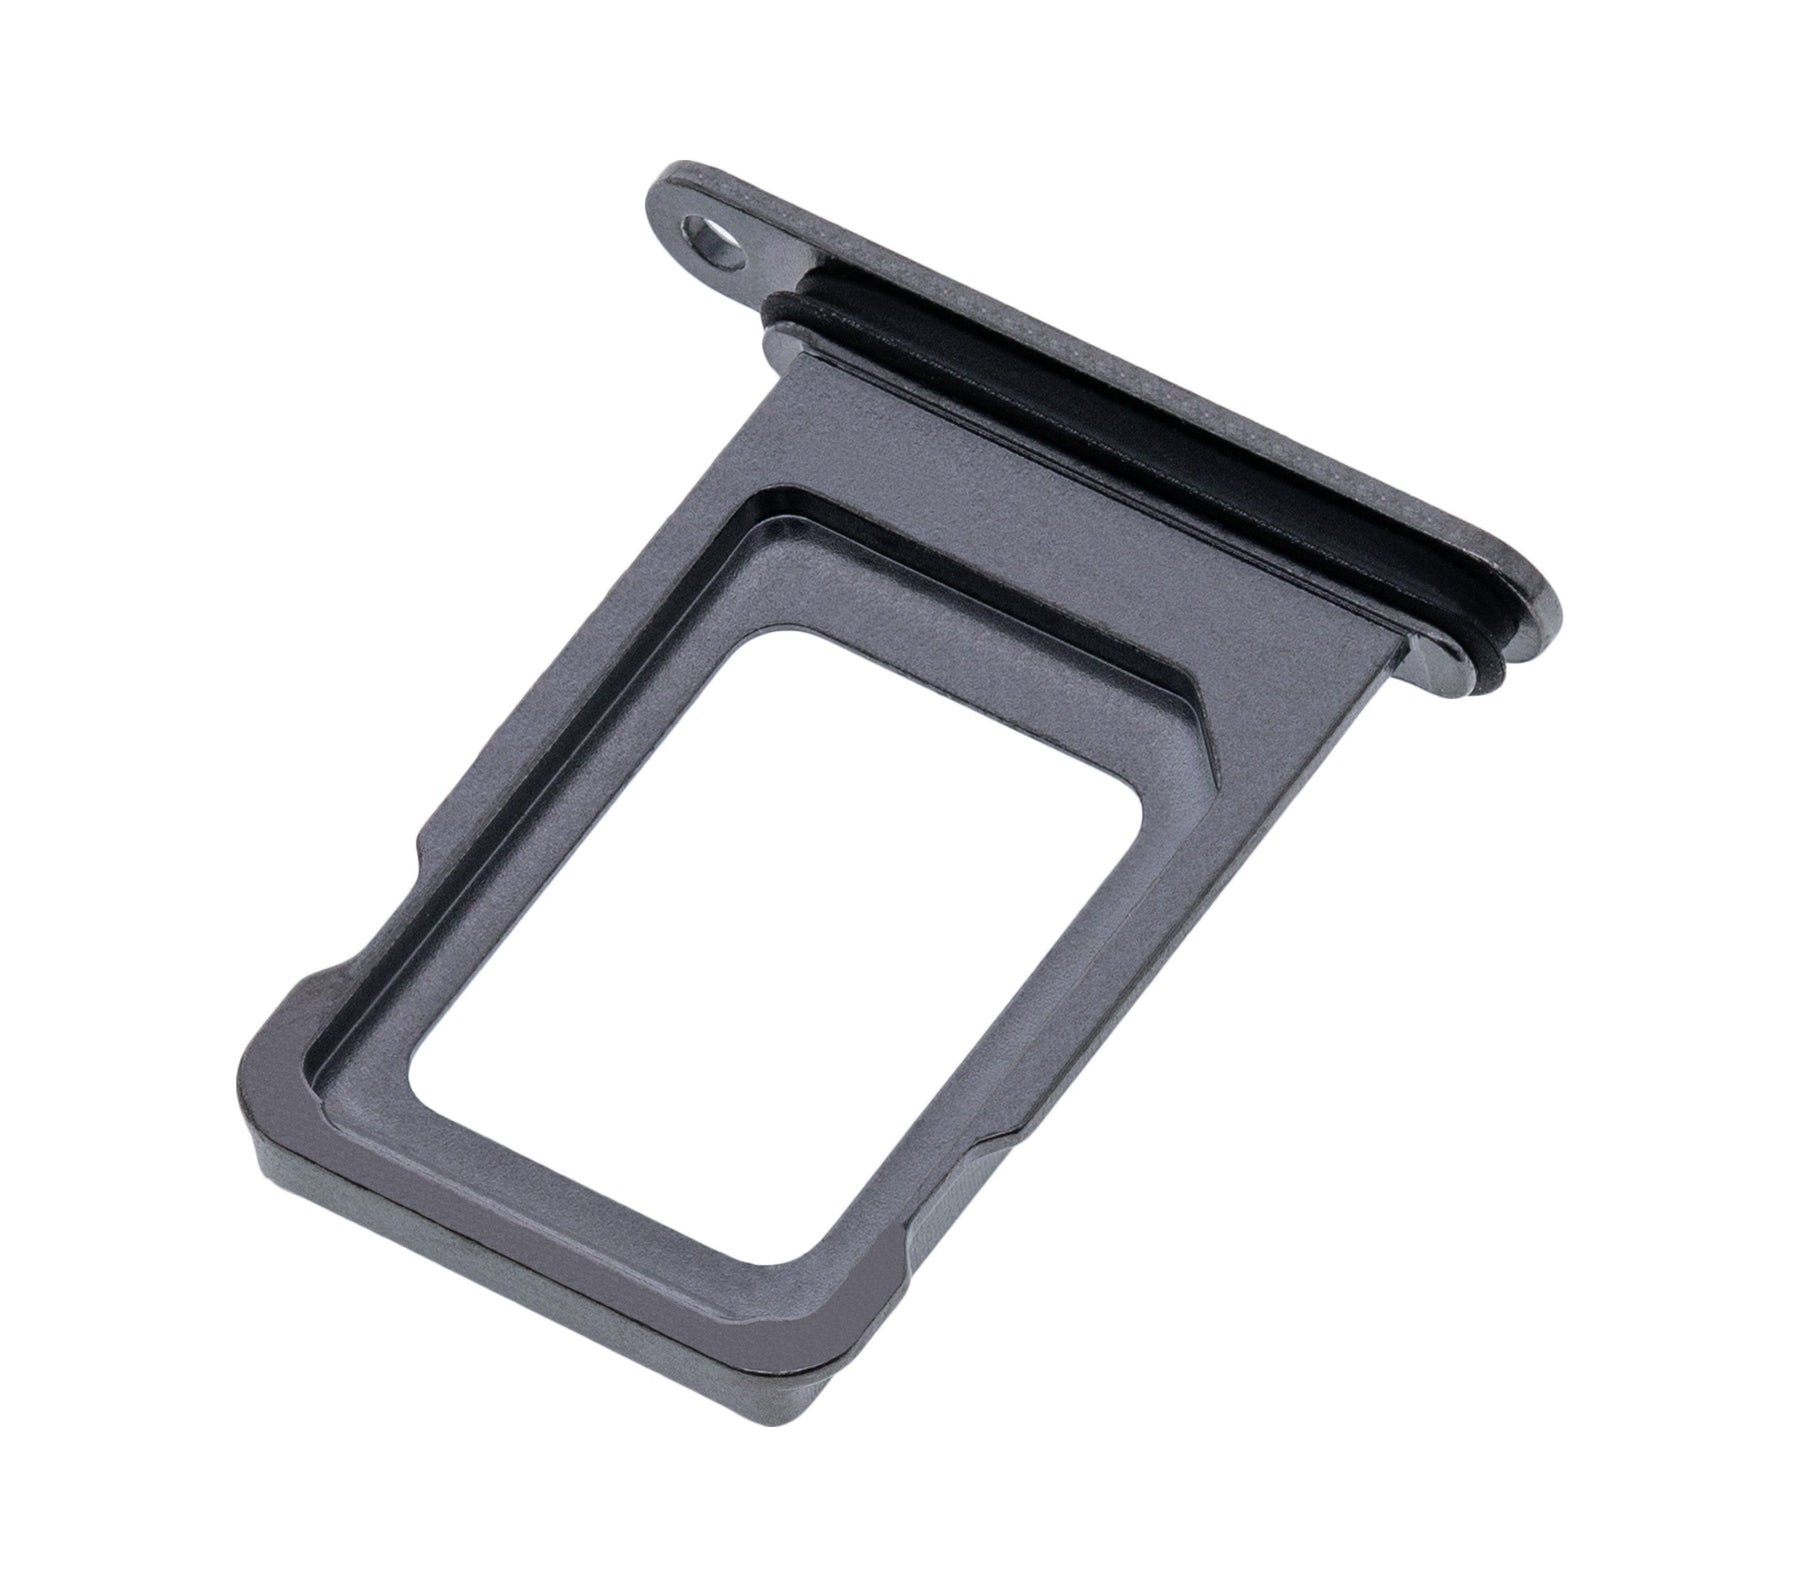 GRAPHITE DUAL SIM CARD TRAY COMPATIBLE FOR IPHONE 12 PRO / 12 PRO MAX